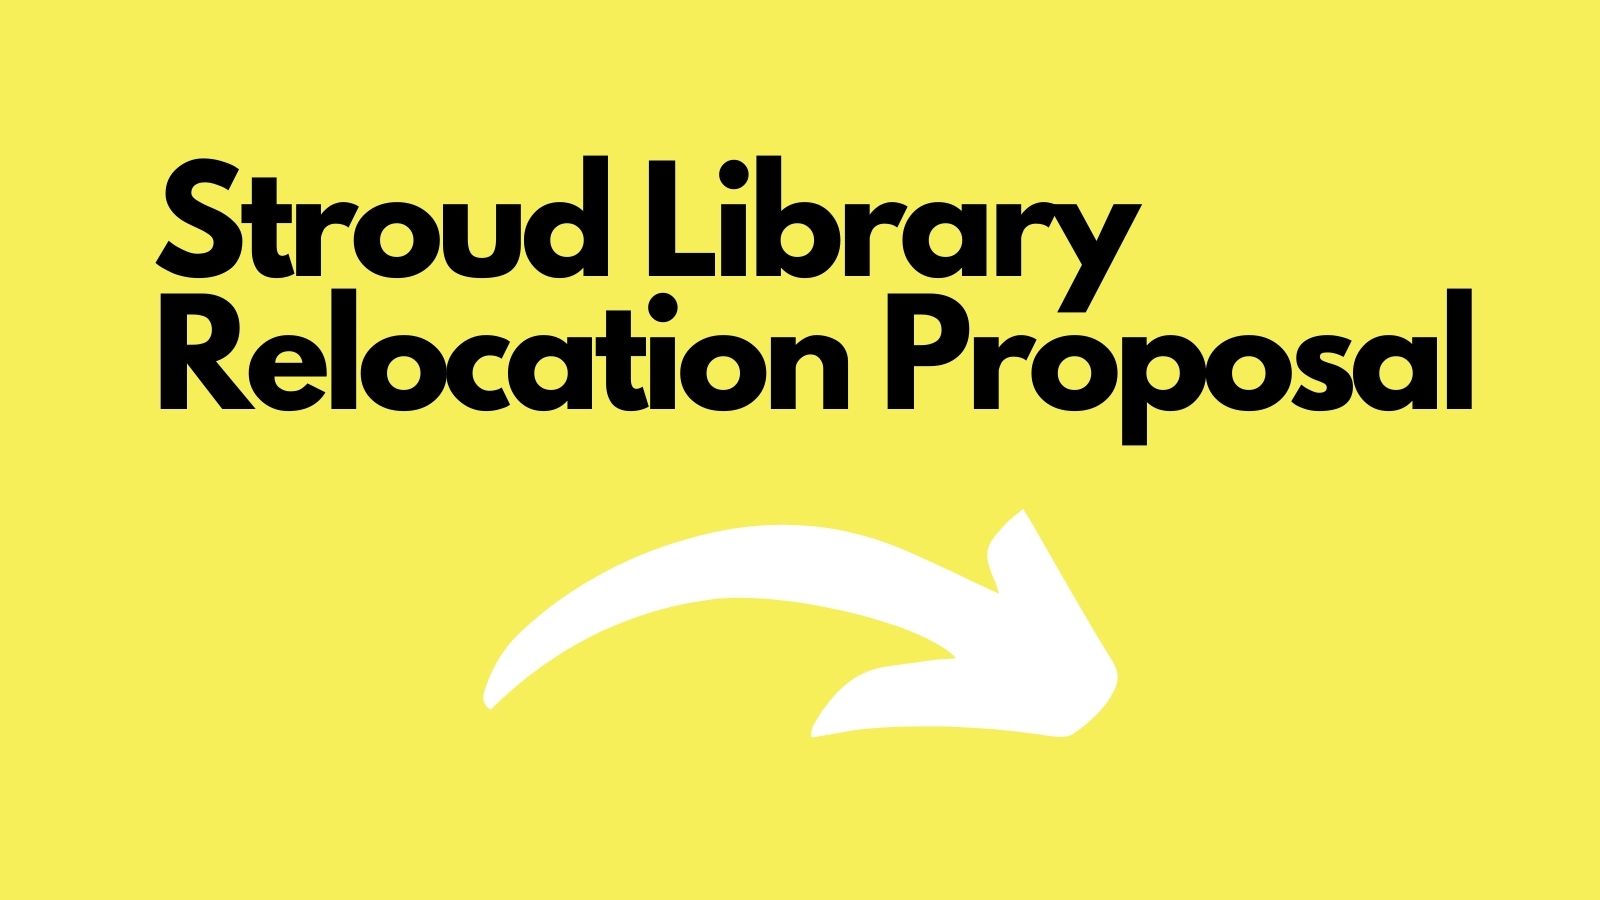 Stroud Library Relocation Proposal